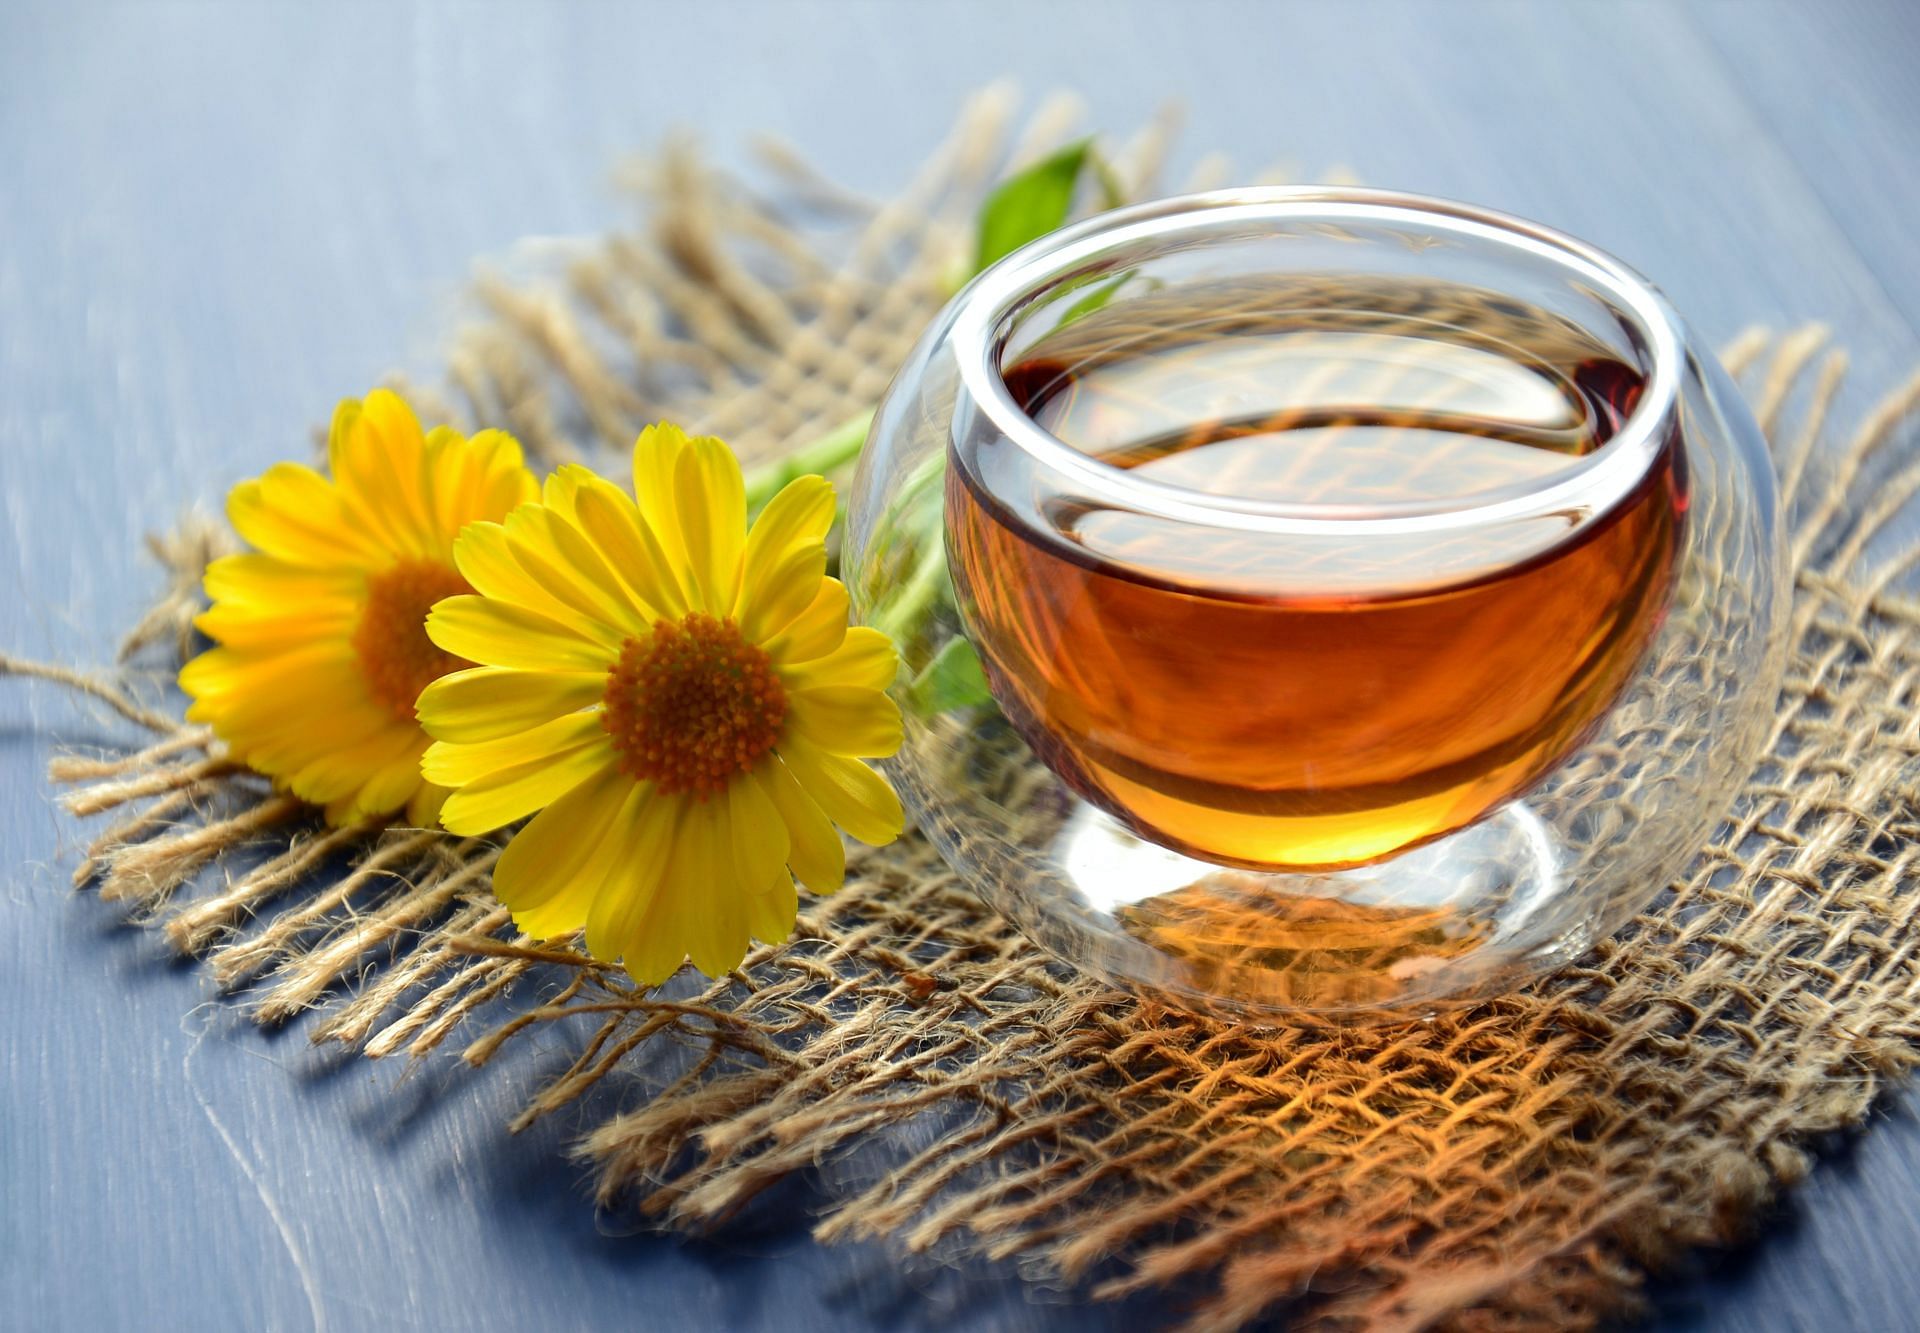 Herbal tea are also a good way to get relief. (Image via Pexels/ Mareefe)